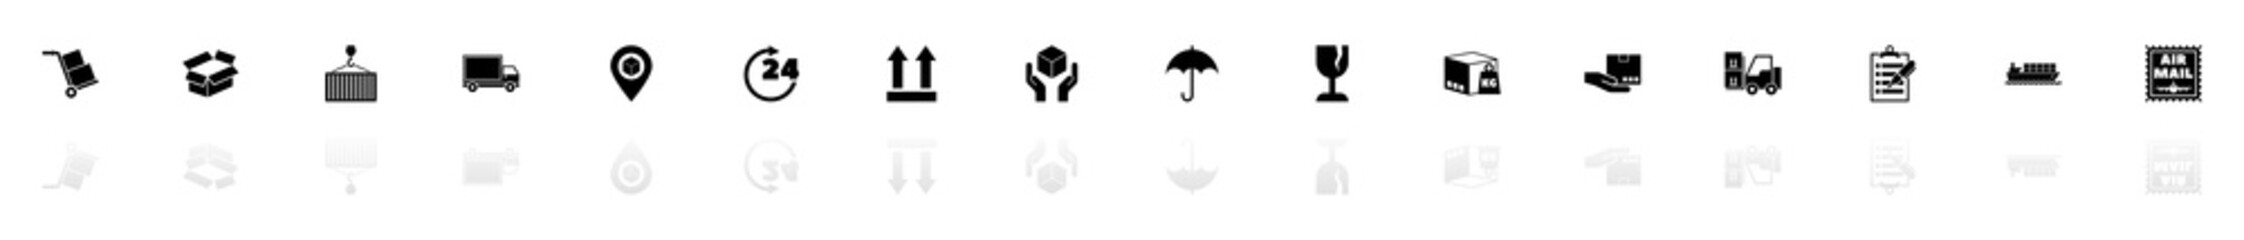 Logistics icons - Black horizontal Illustration symbol on White Background with a mirror Shadow reflection. Flat Vector Icon.